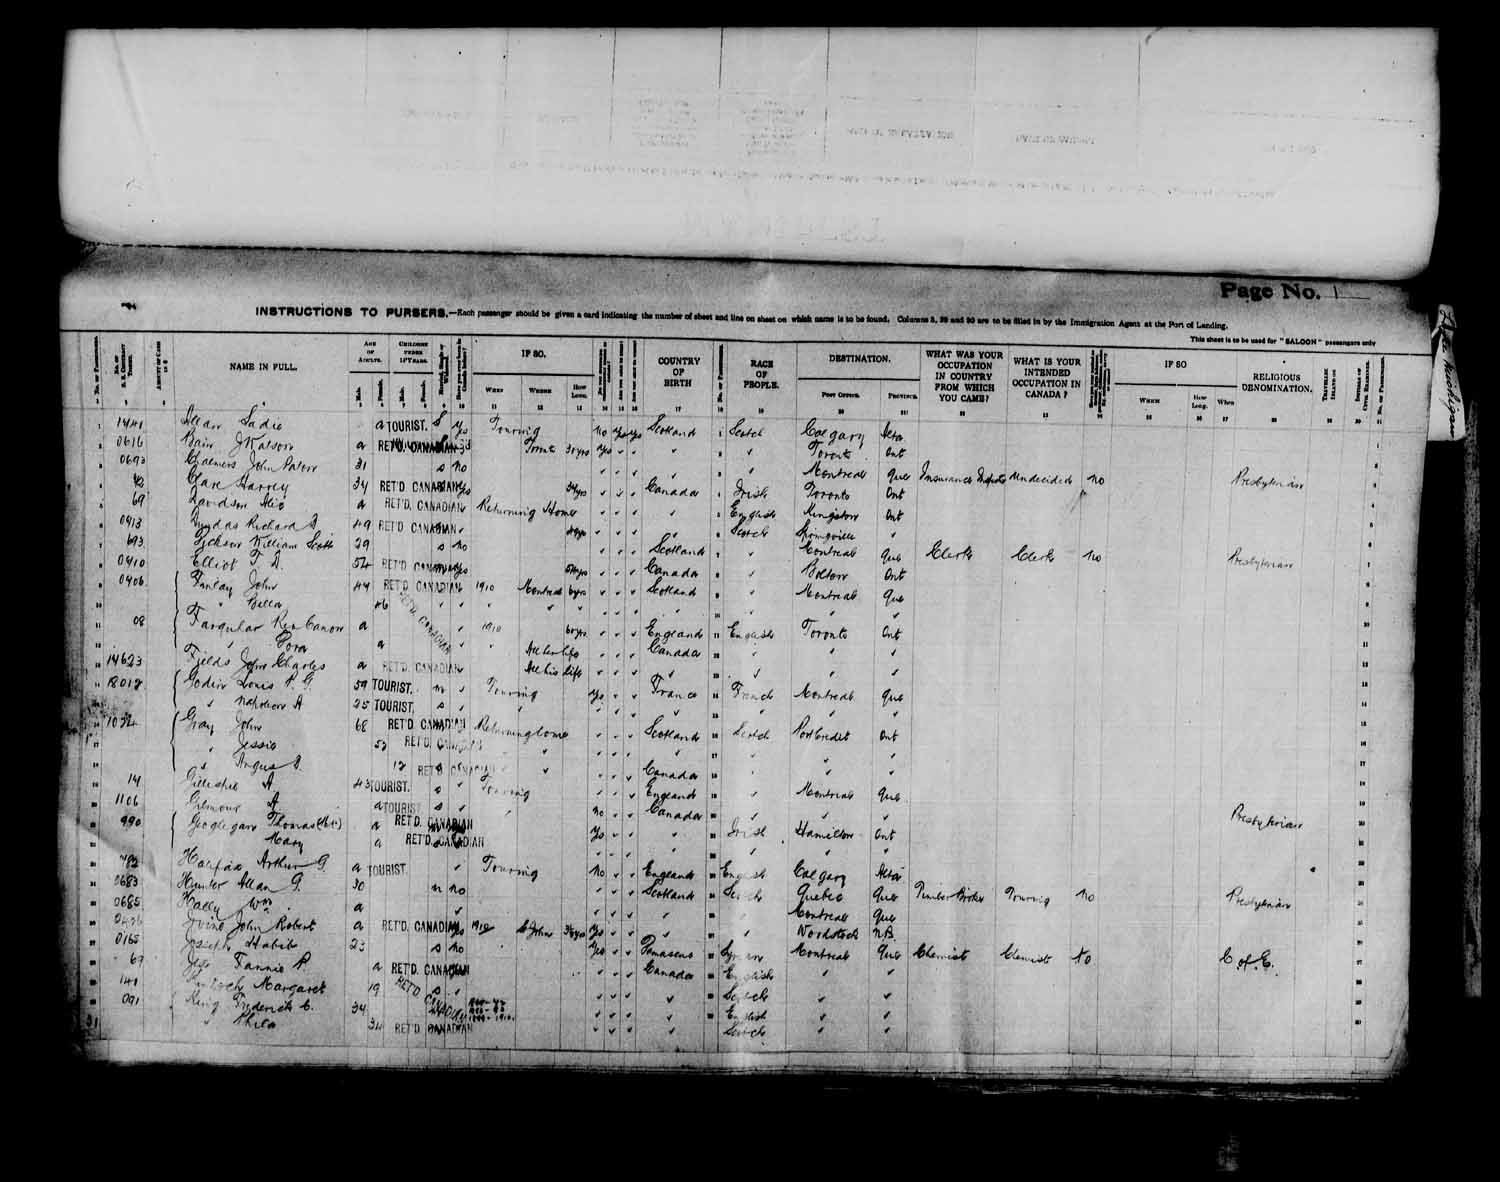 Digitized page of Passenger Lists for Image No.: e003566507